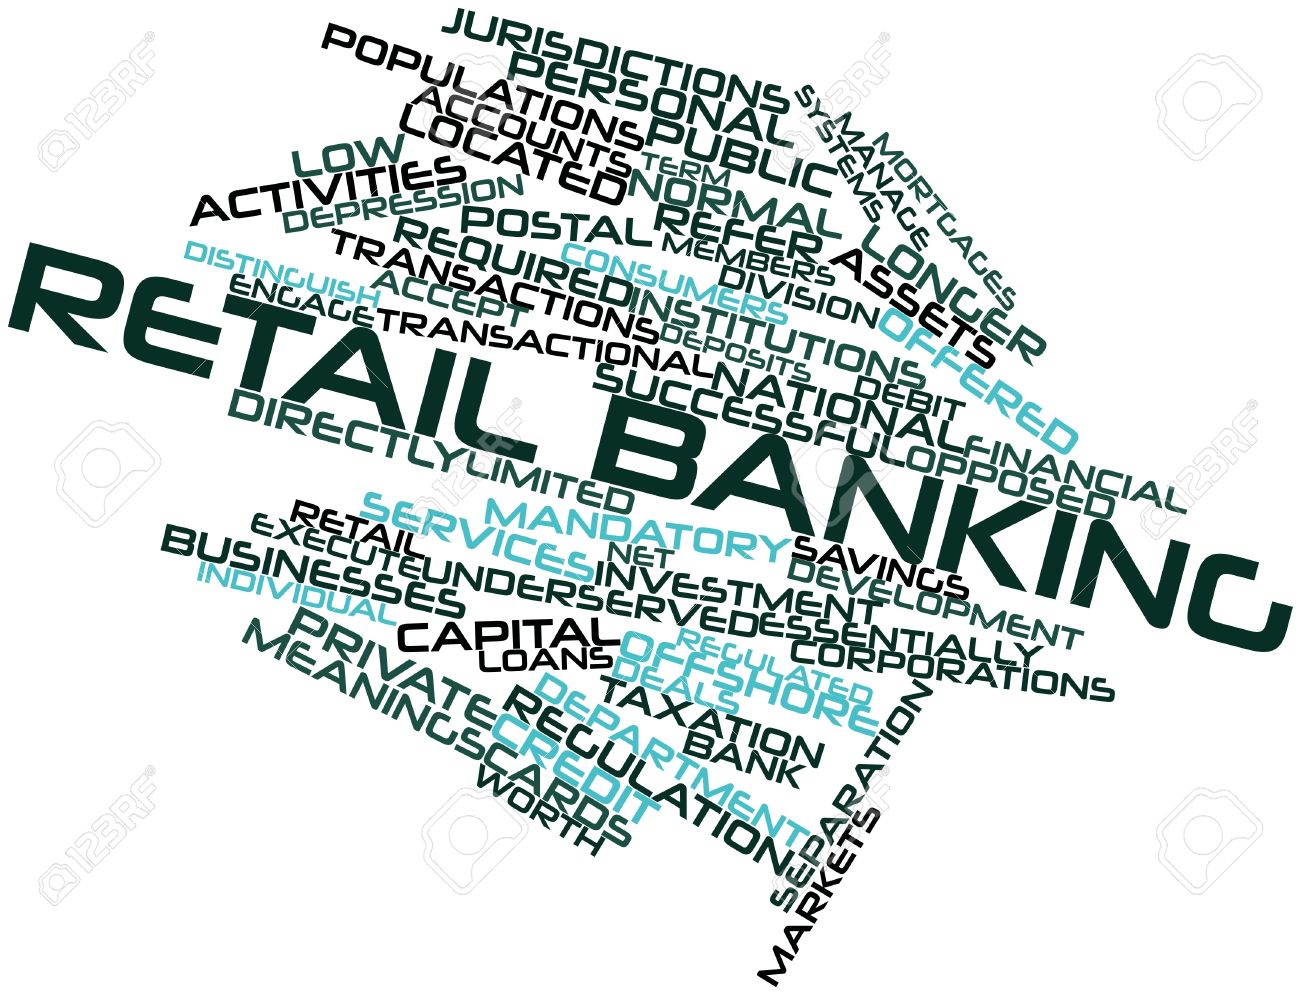 DOMESTIC OPERATION FOR RETAIL BANKING